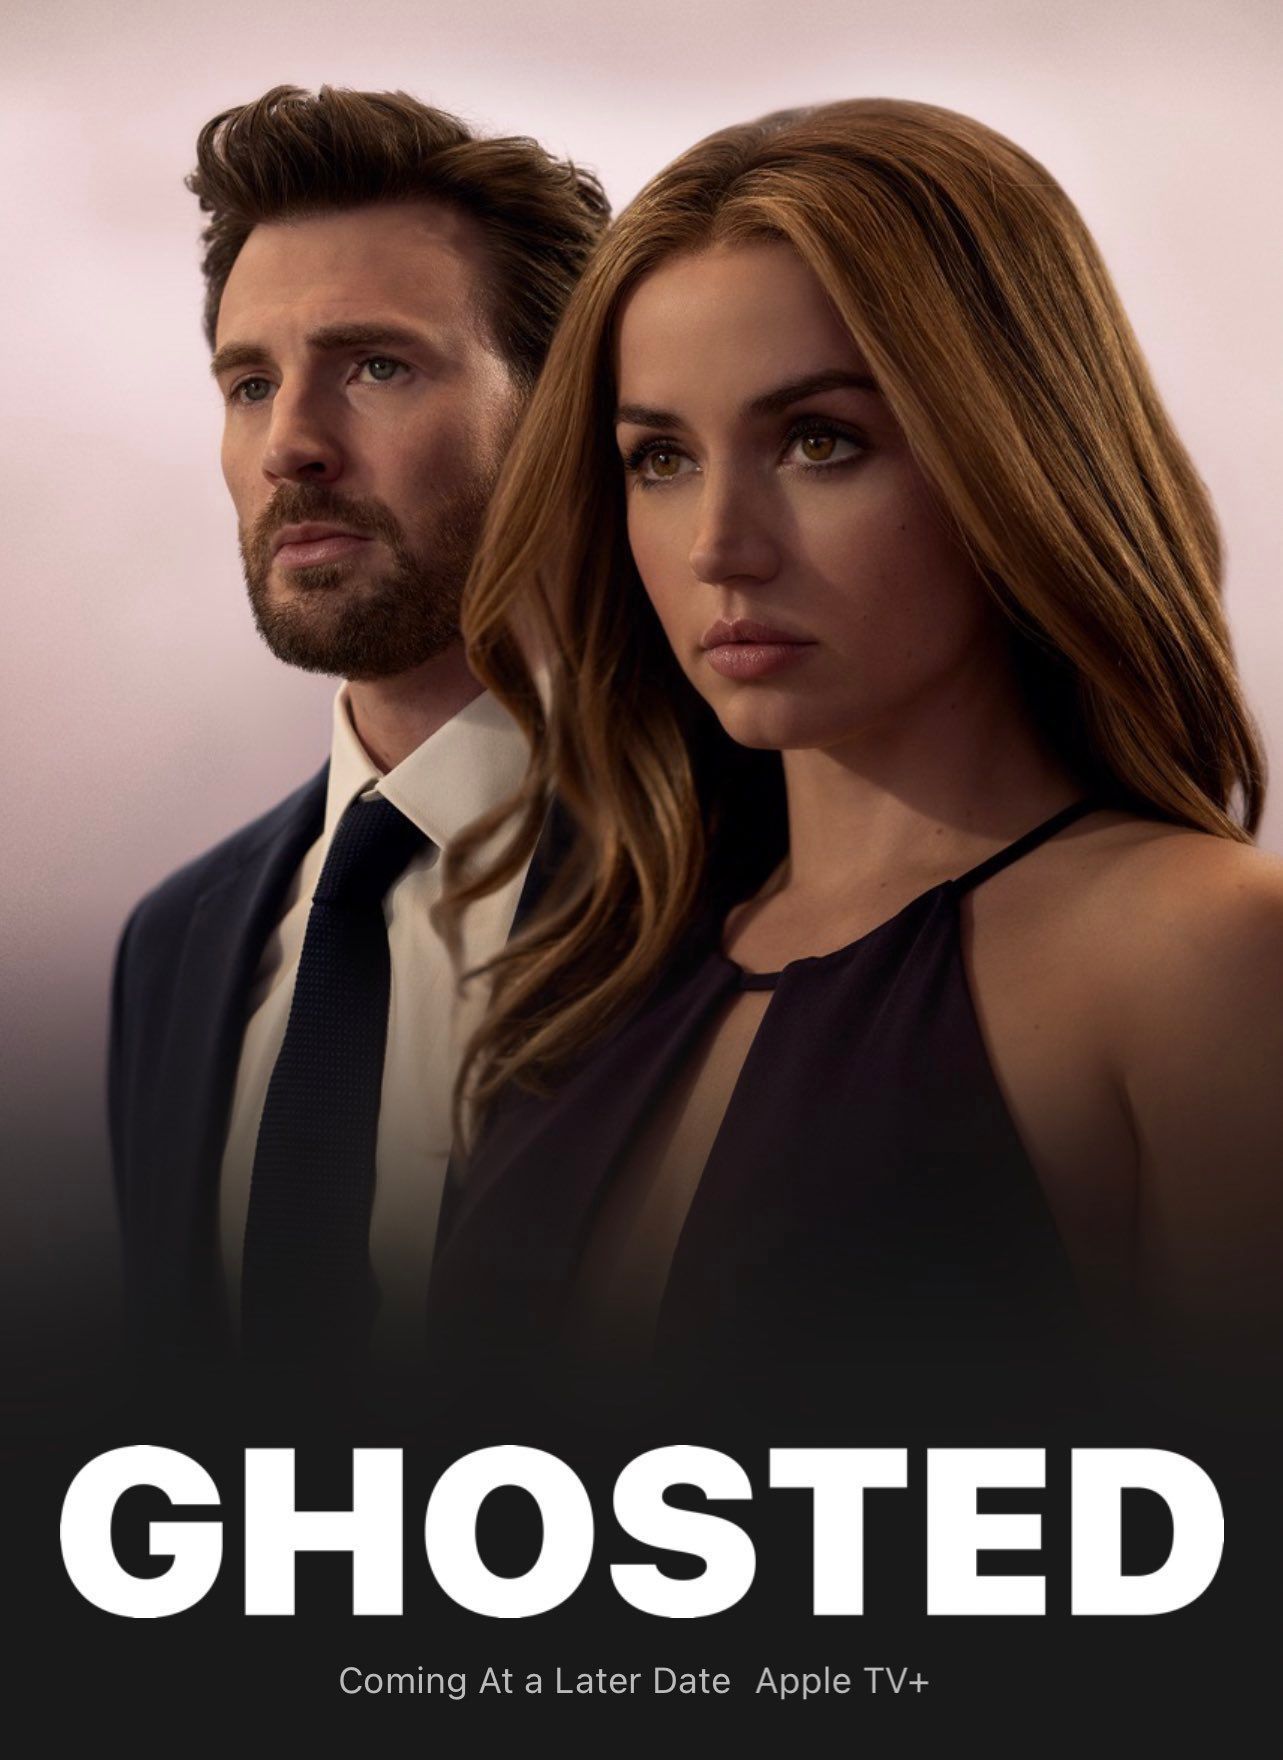 ghosted poster with chris evns and ana de armas